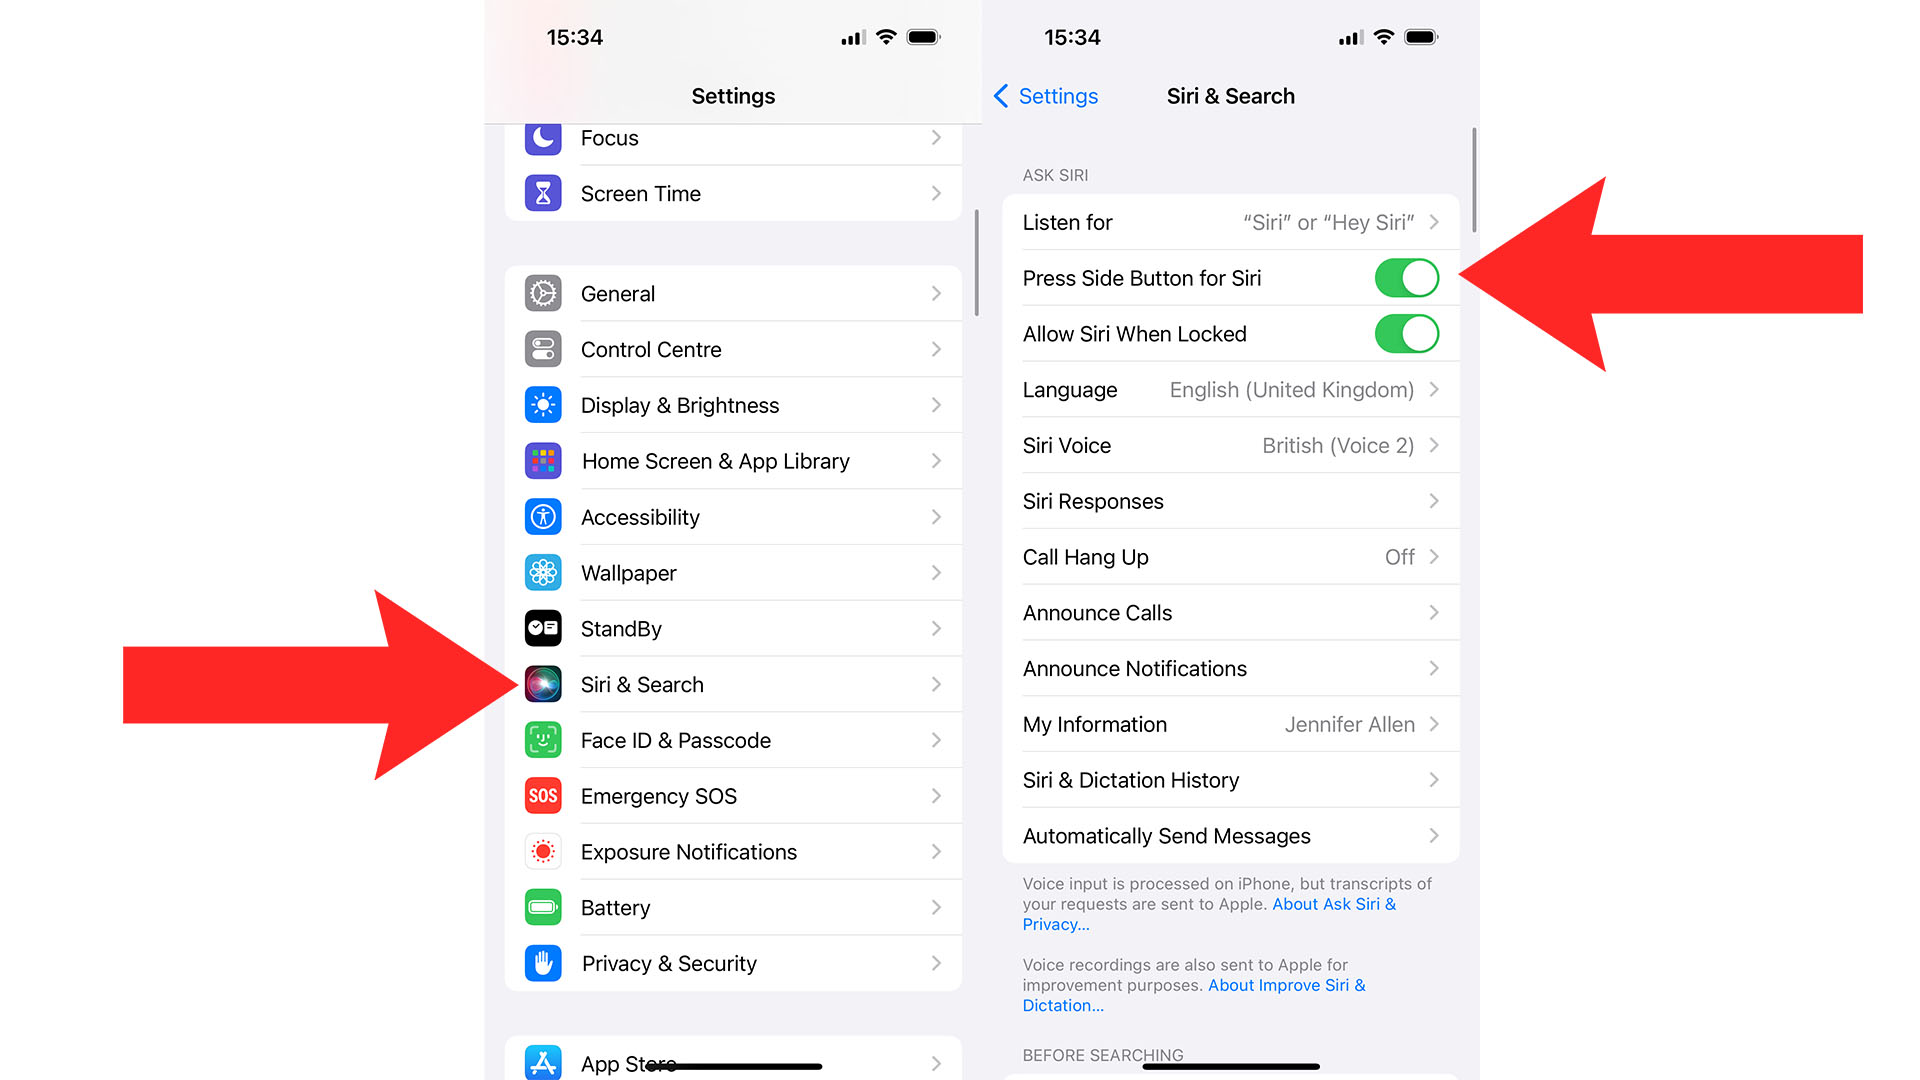 Steps for finding Siri & Search in iOS Settings.